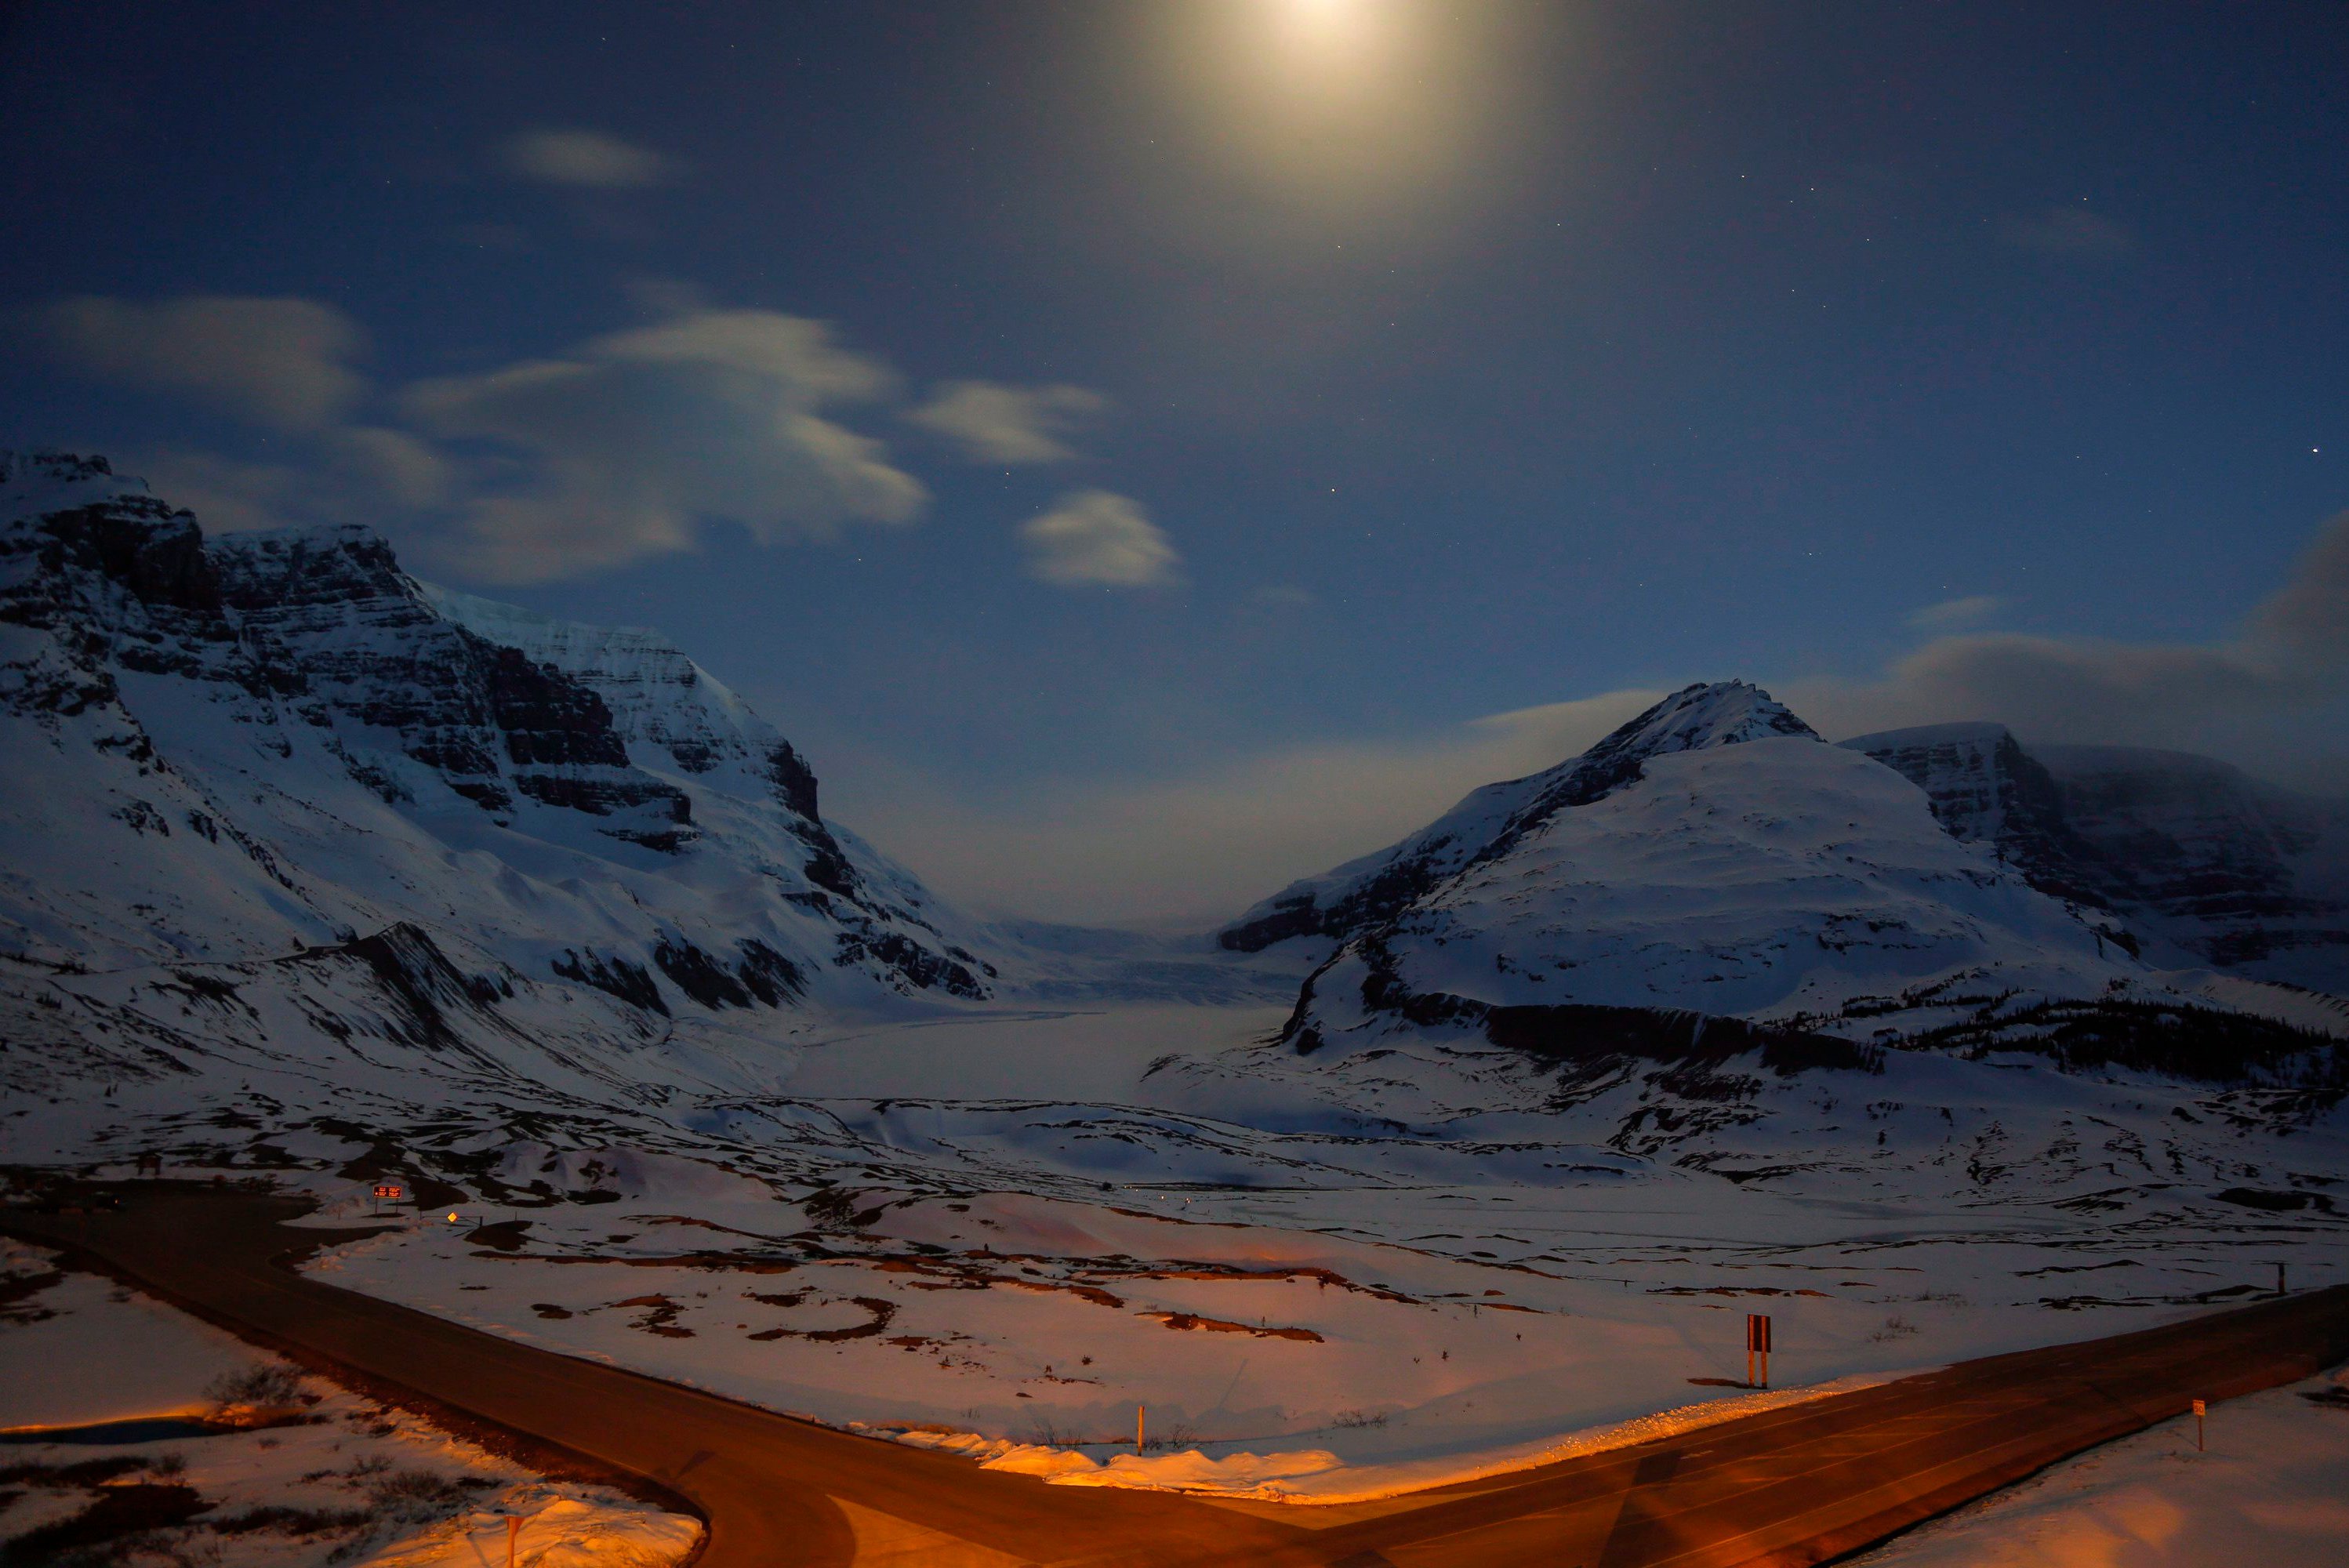 The Athabasca Glacier, centre, part of the Columbia Icefields in Jasper National Park, Alta., is seen in moonlight during a long exposure Wednesday, May 7, 2014. Parks Canada often promotes the Icefields Parkway between Jasper and Banff as "one of the most scenic drives in the world," but a plan to build a bike path along the route has hit its fair share of bumps in the road. 